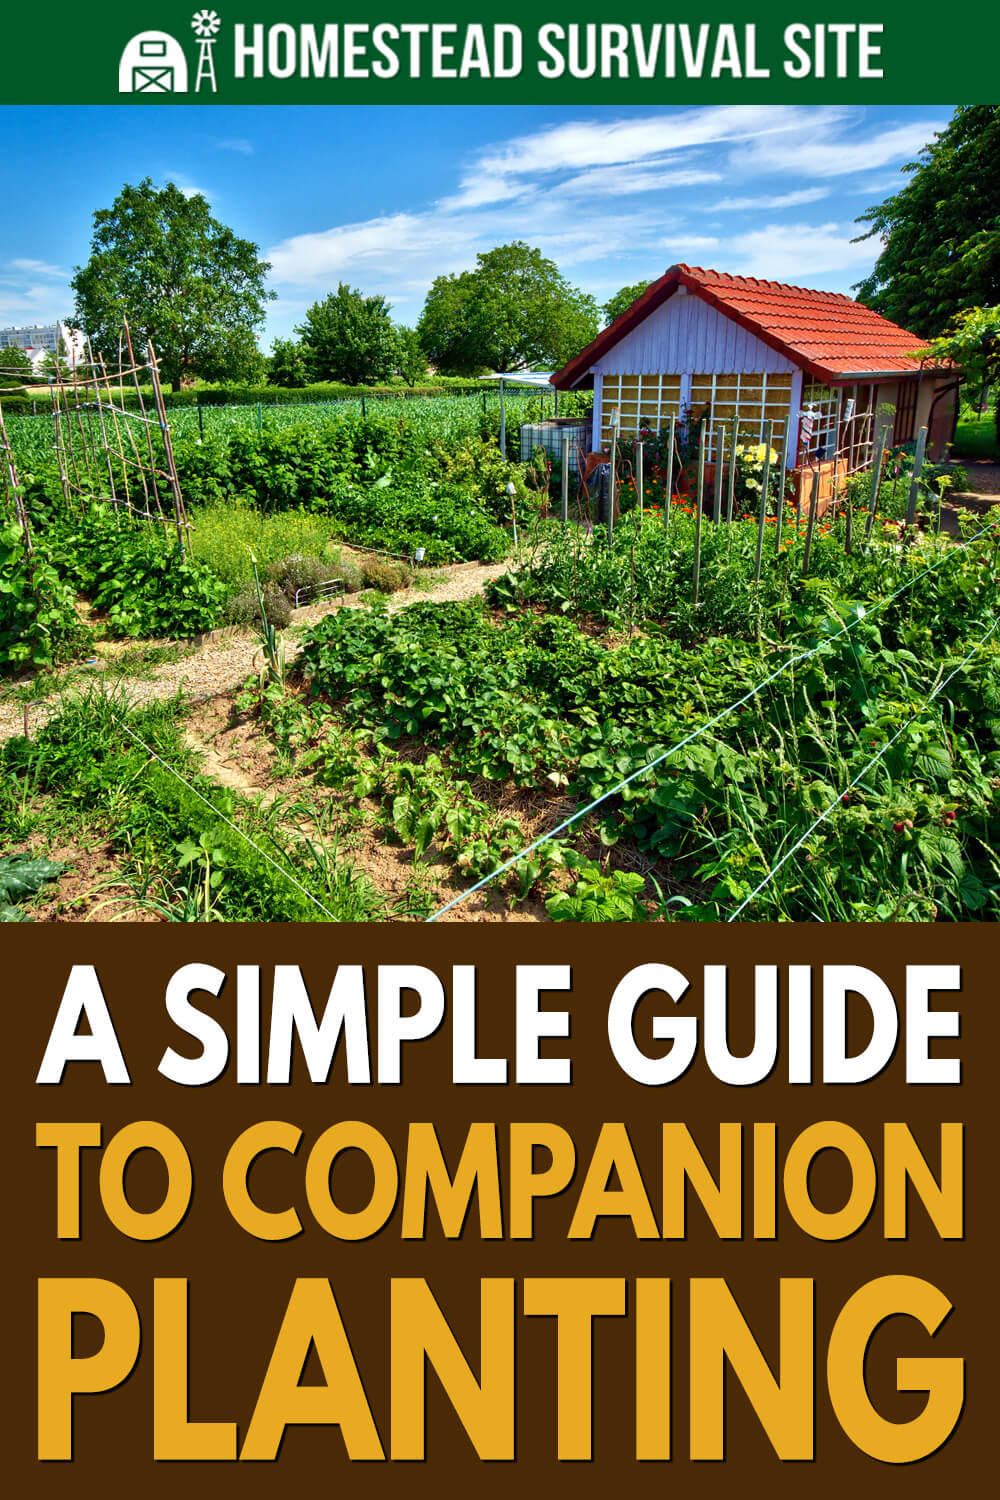 A Simple Guide to Companion Planting